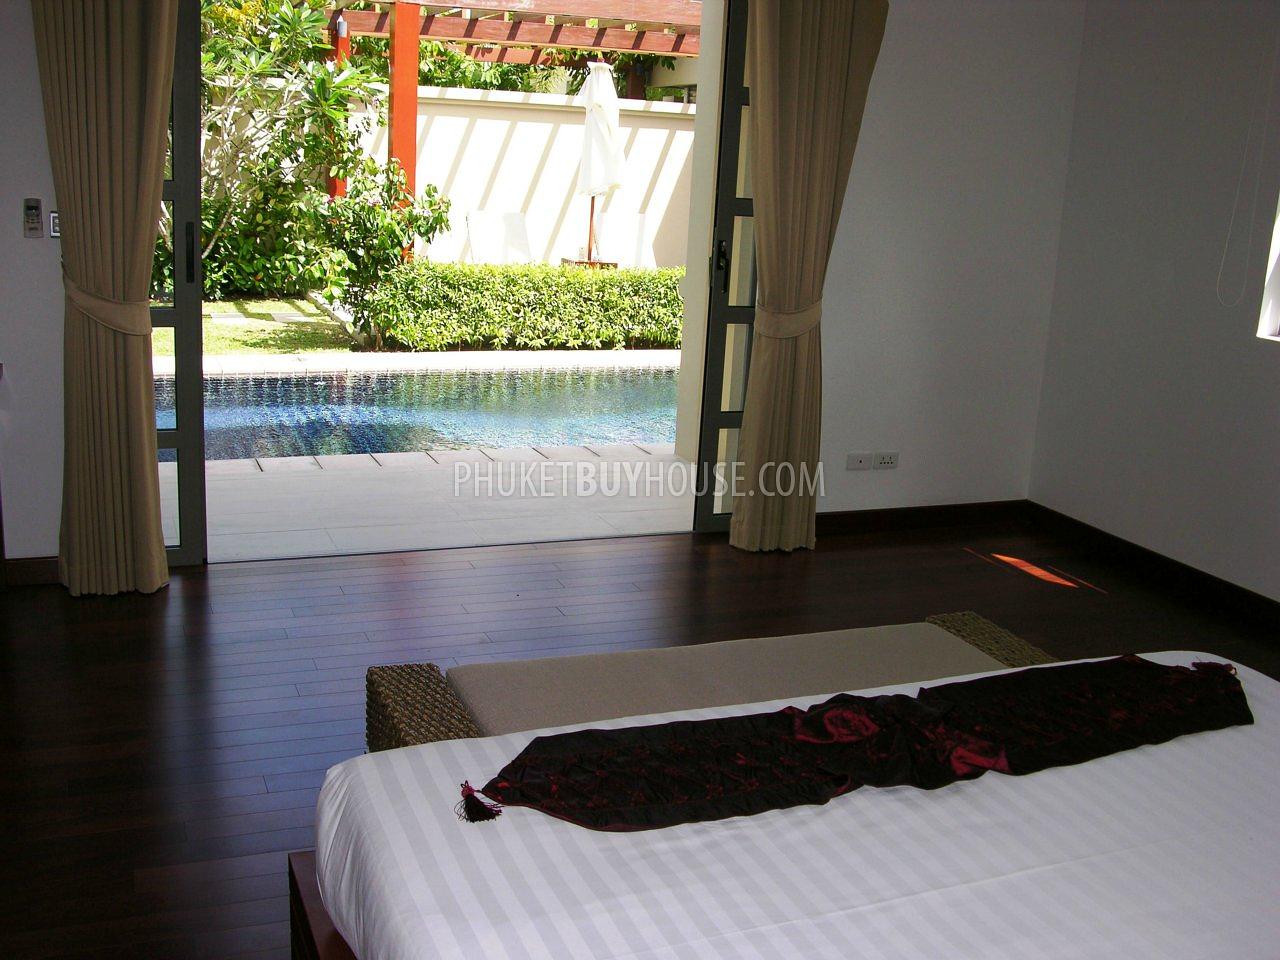 BAN6285: Luxury Villa with Private Pool in Secure Complex with Spa near Bang Tao Beach. Photo #5